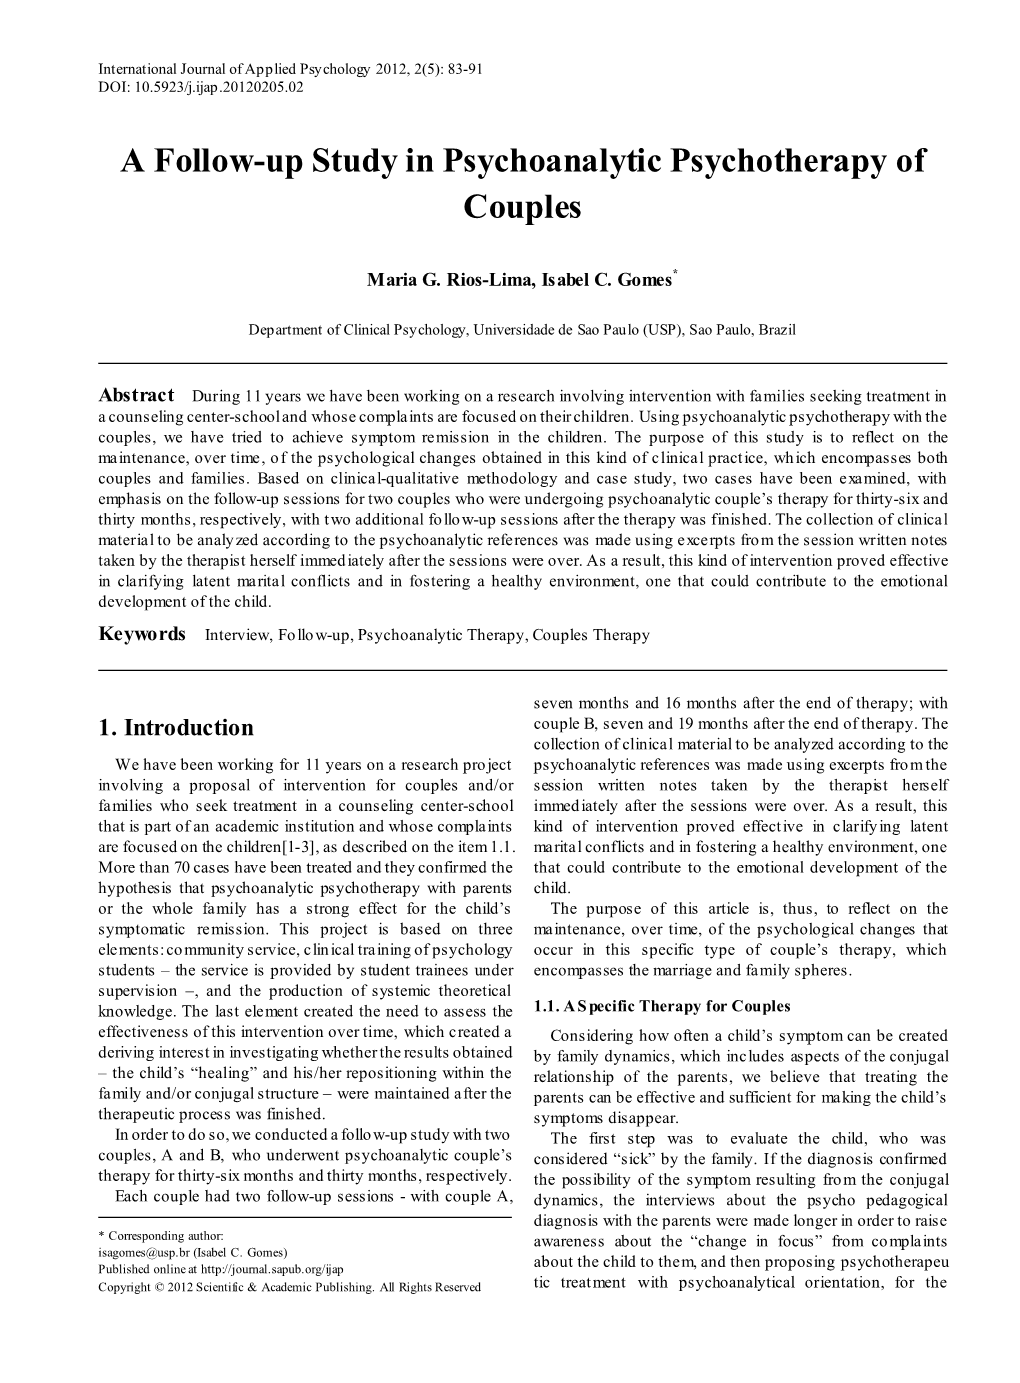 A Follow-Up Study in Psychoanalytic Psychotherapy of Couples